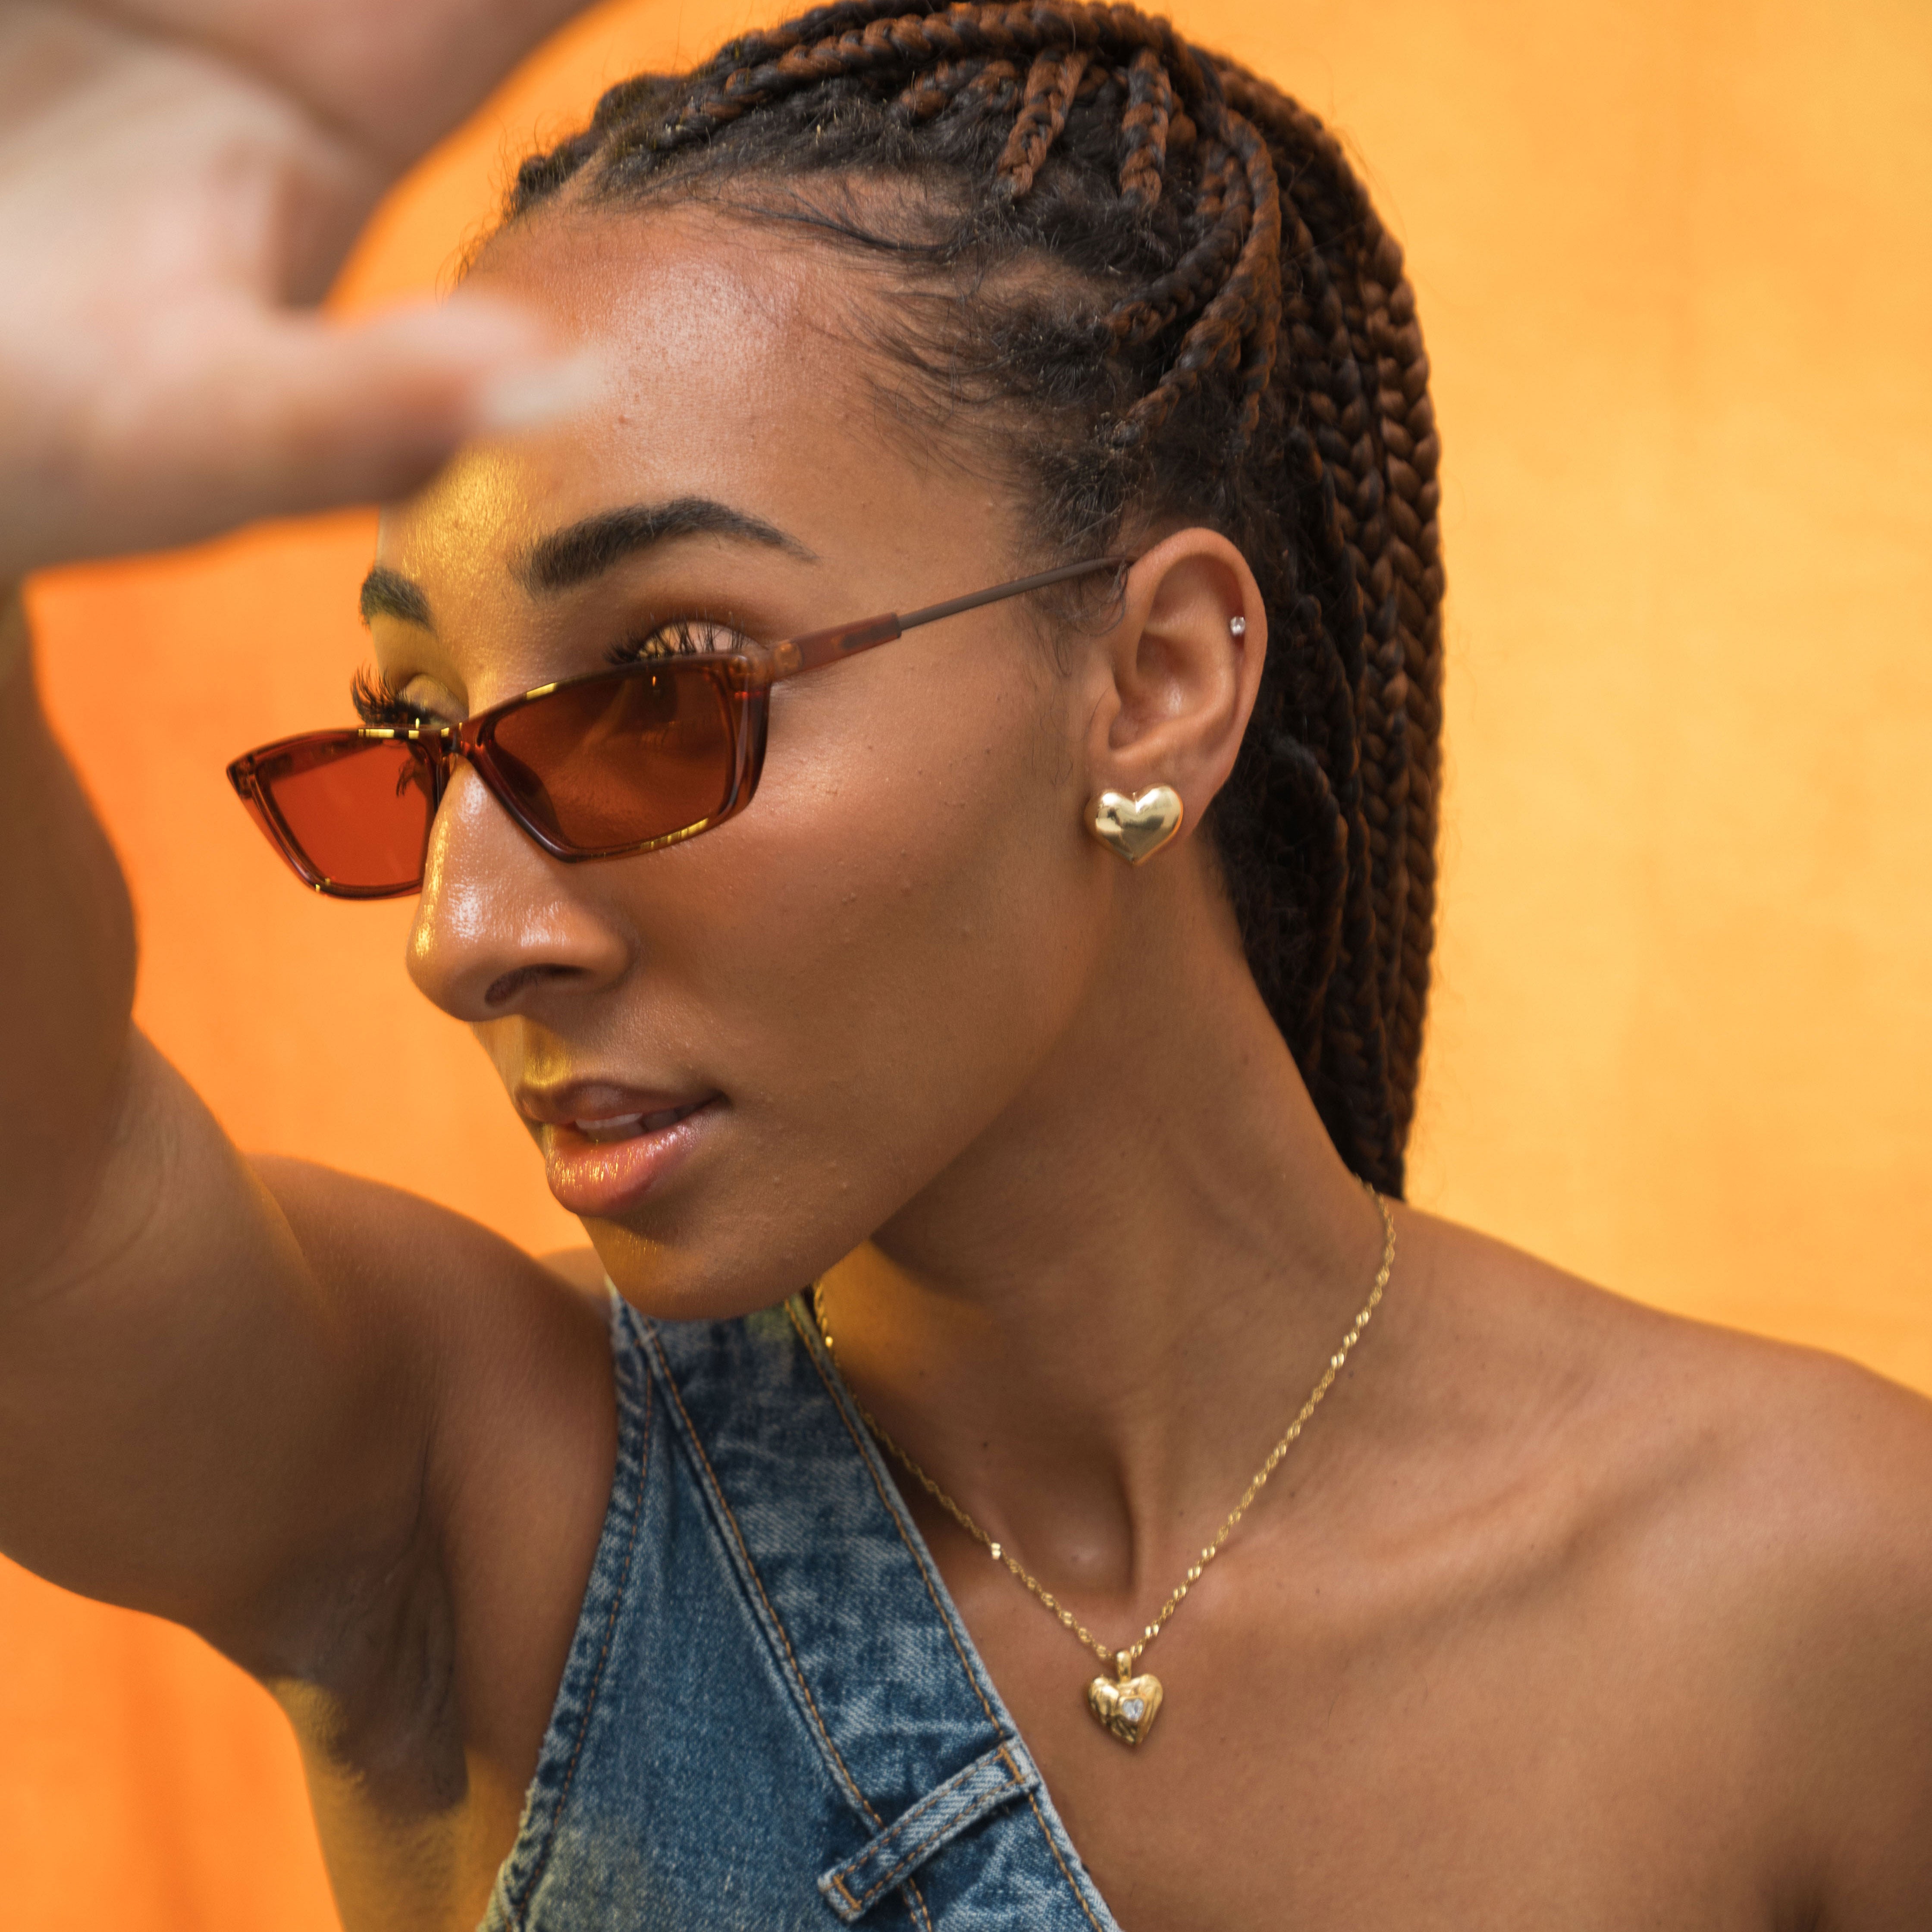 A model wearing the Coeur Clip On Earrings in Gold offer a medium-strength, adjustable hold via a mosquito coil clip. Ideal for all ear types, these earrings provide a secure yet comfortable fit for up to 24 hours. Crafted with Zinc Alloy and Copper, each purchase contains a single pair.